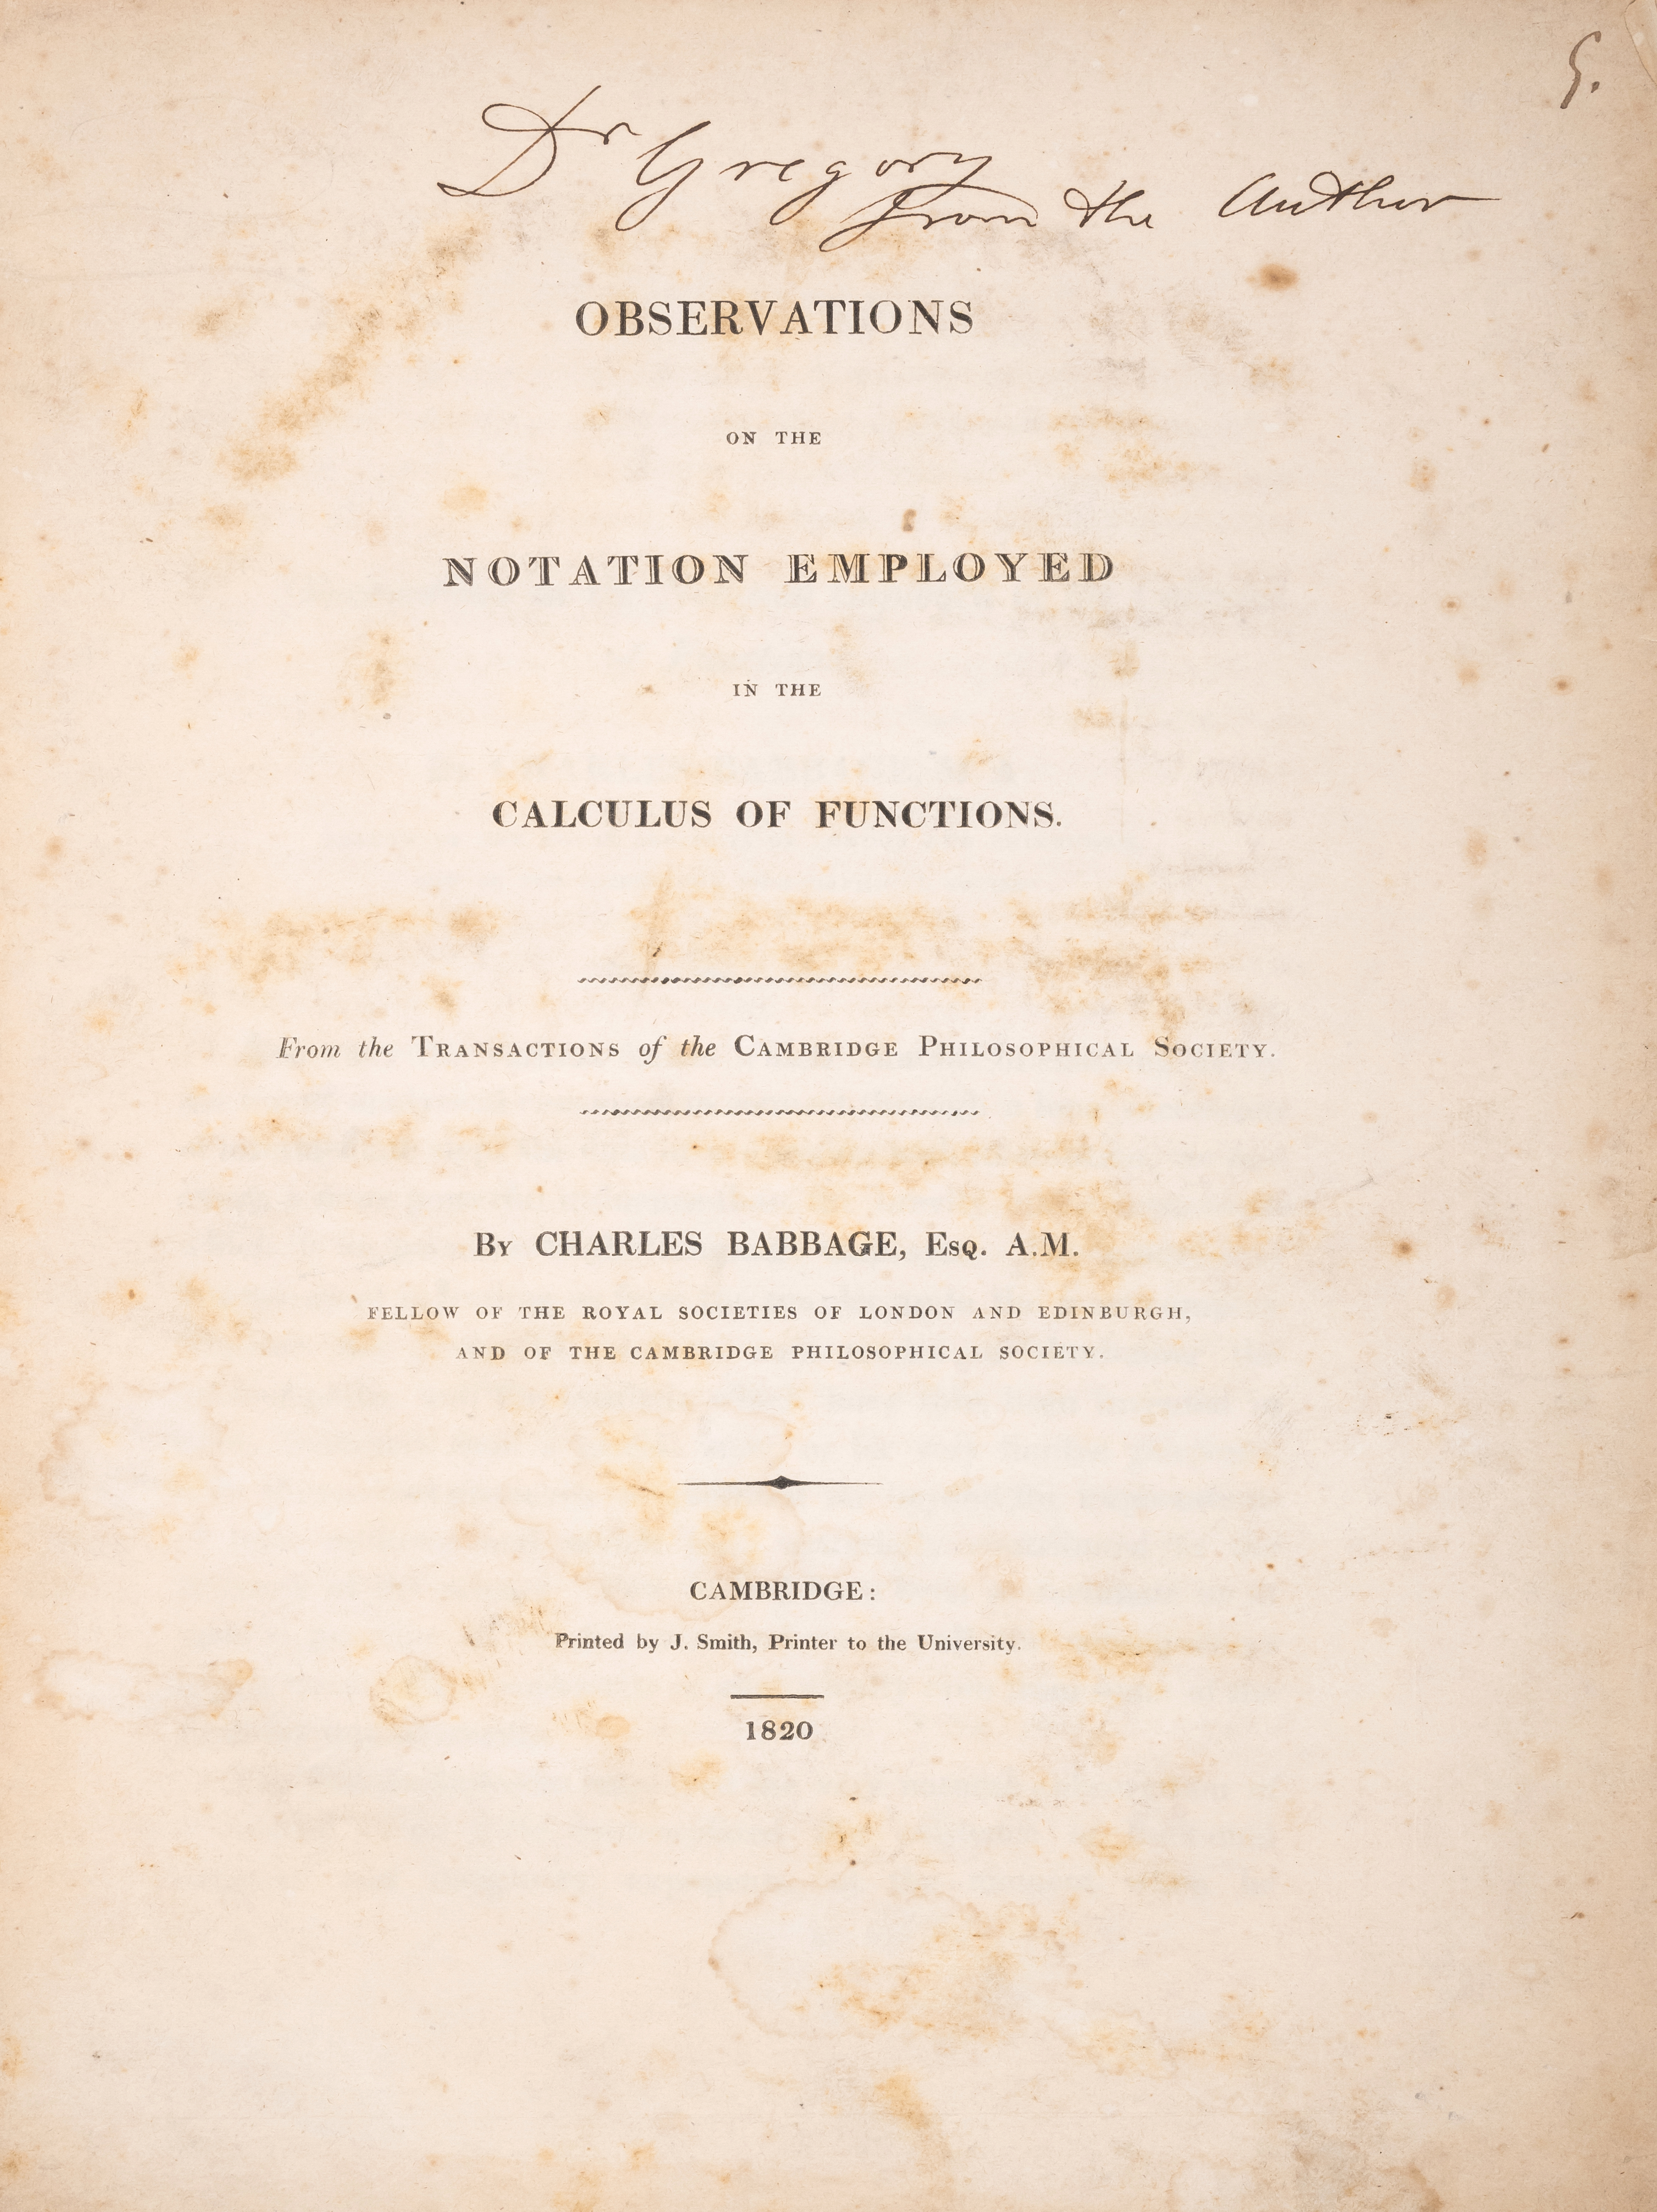 Babbage (Charles) Observations on the Notation Employed in the Calculus of Functions, presentatio...